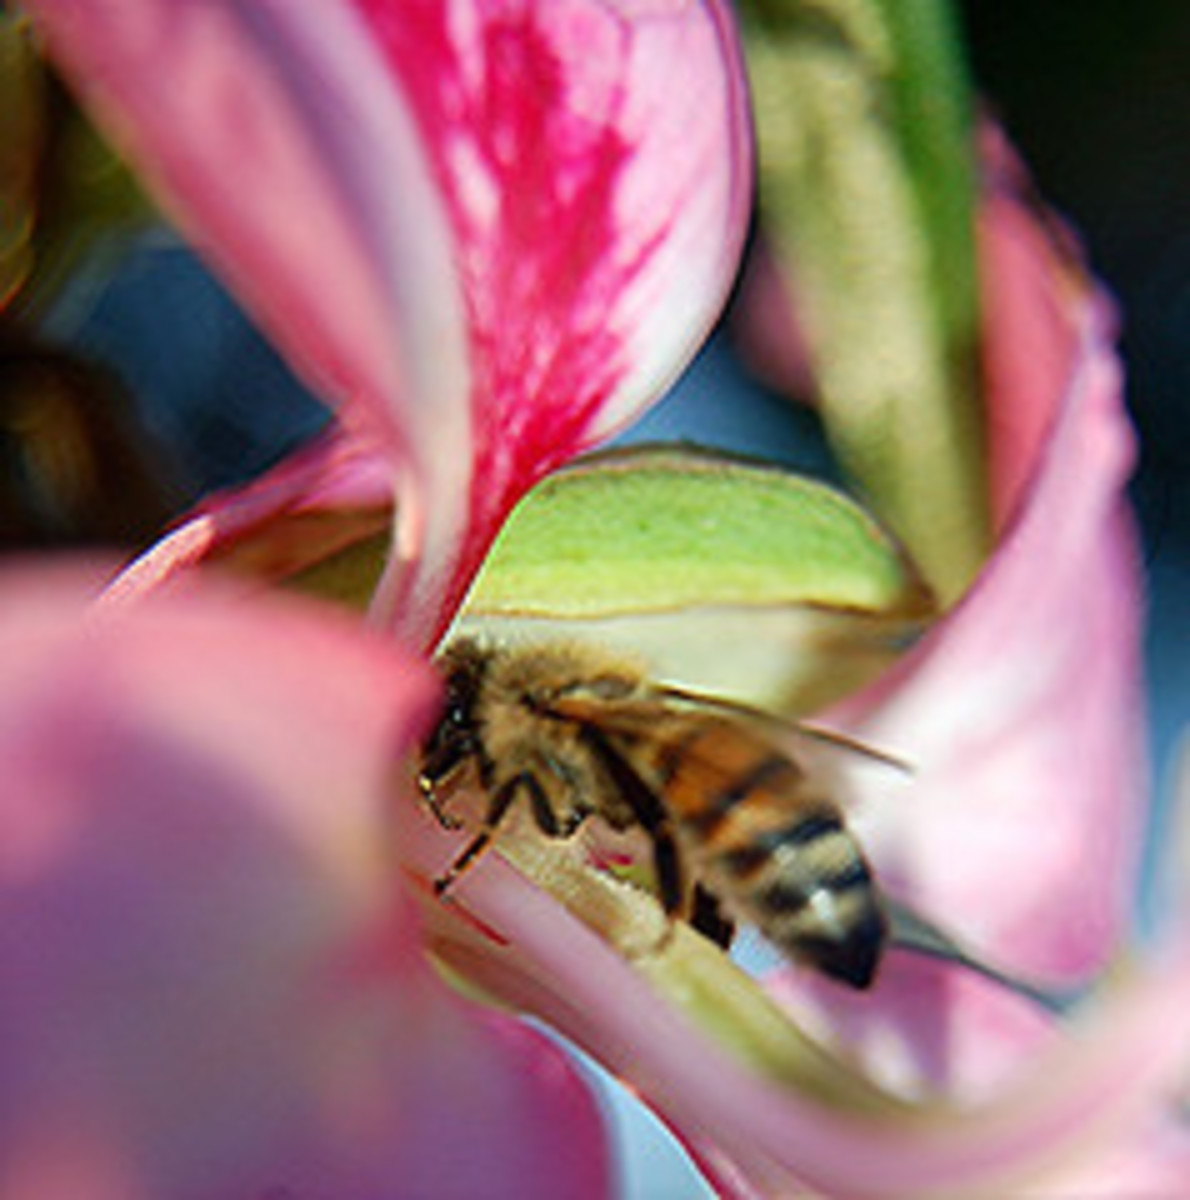 Honey Bee on Orchid Flower.